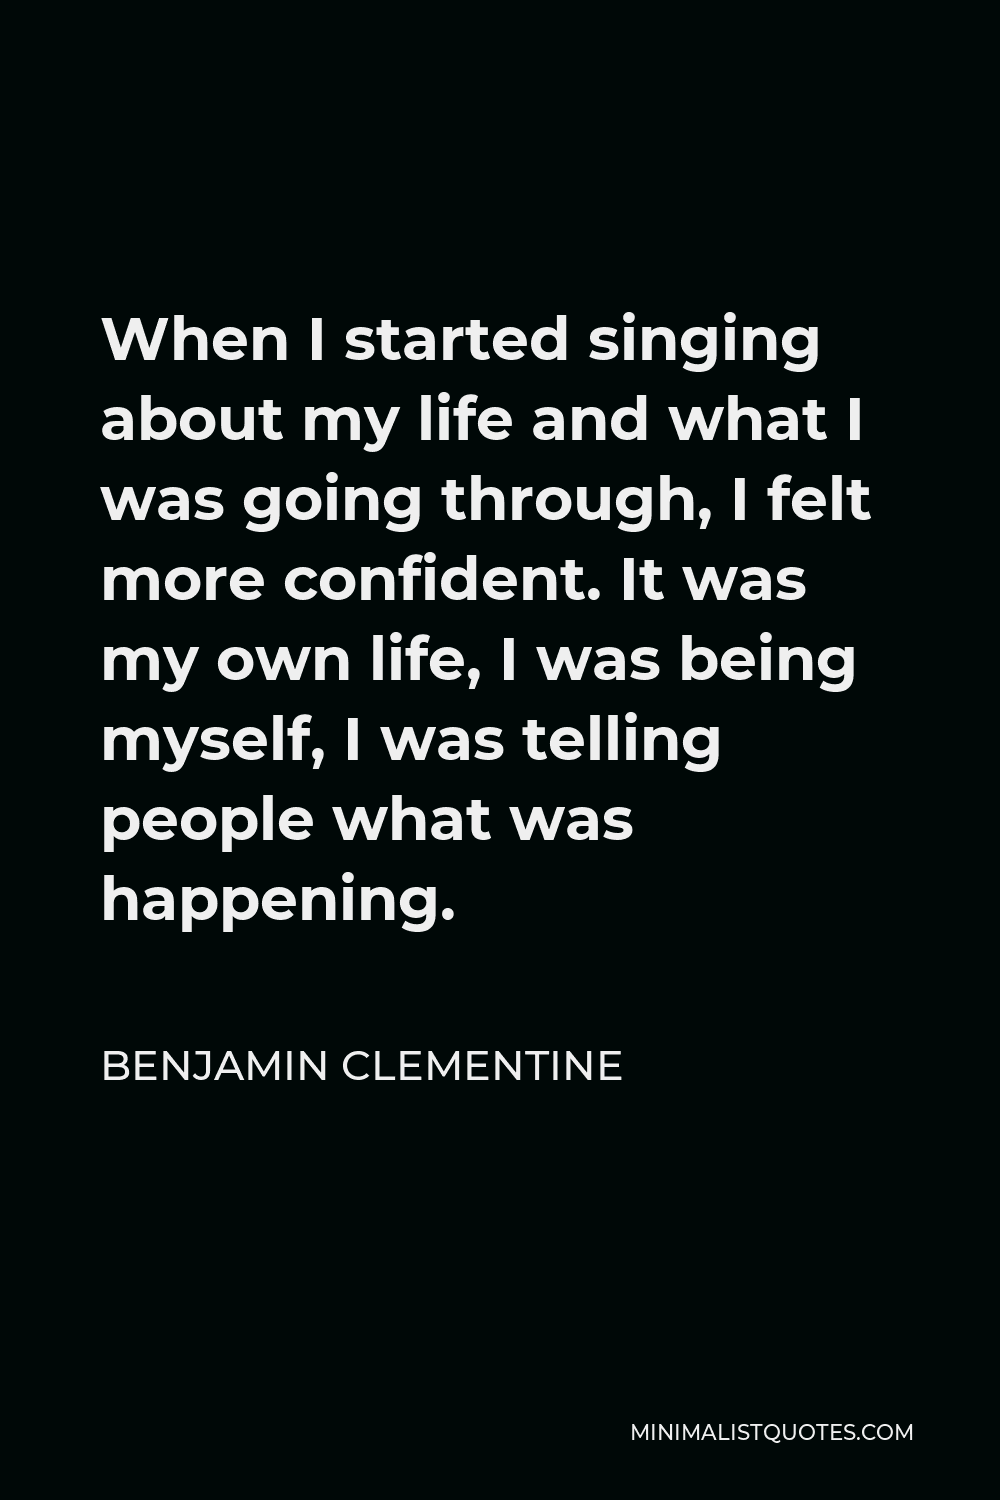 Benjamin Clementine Quote - When I started singing about my life and what I was going through, I felt more confident. It was my own life, I was being myself, I was telling people what was happening.